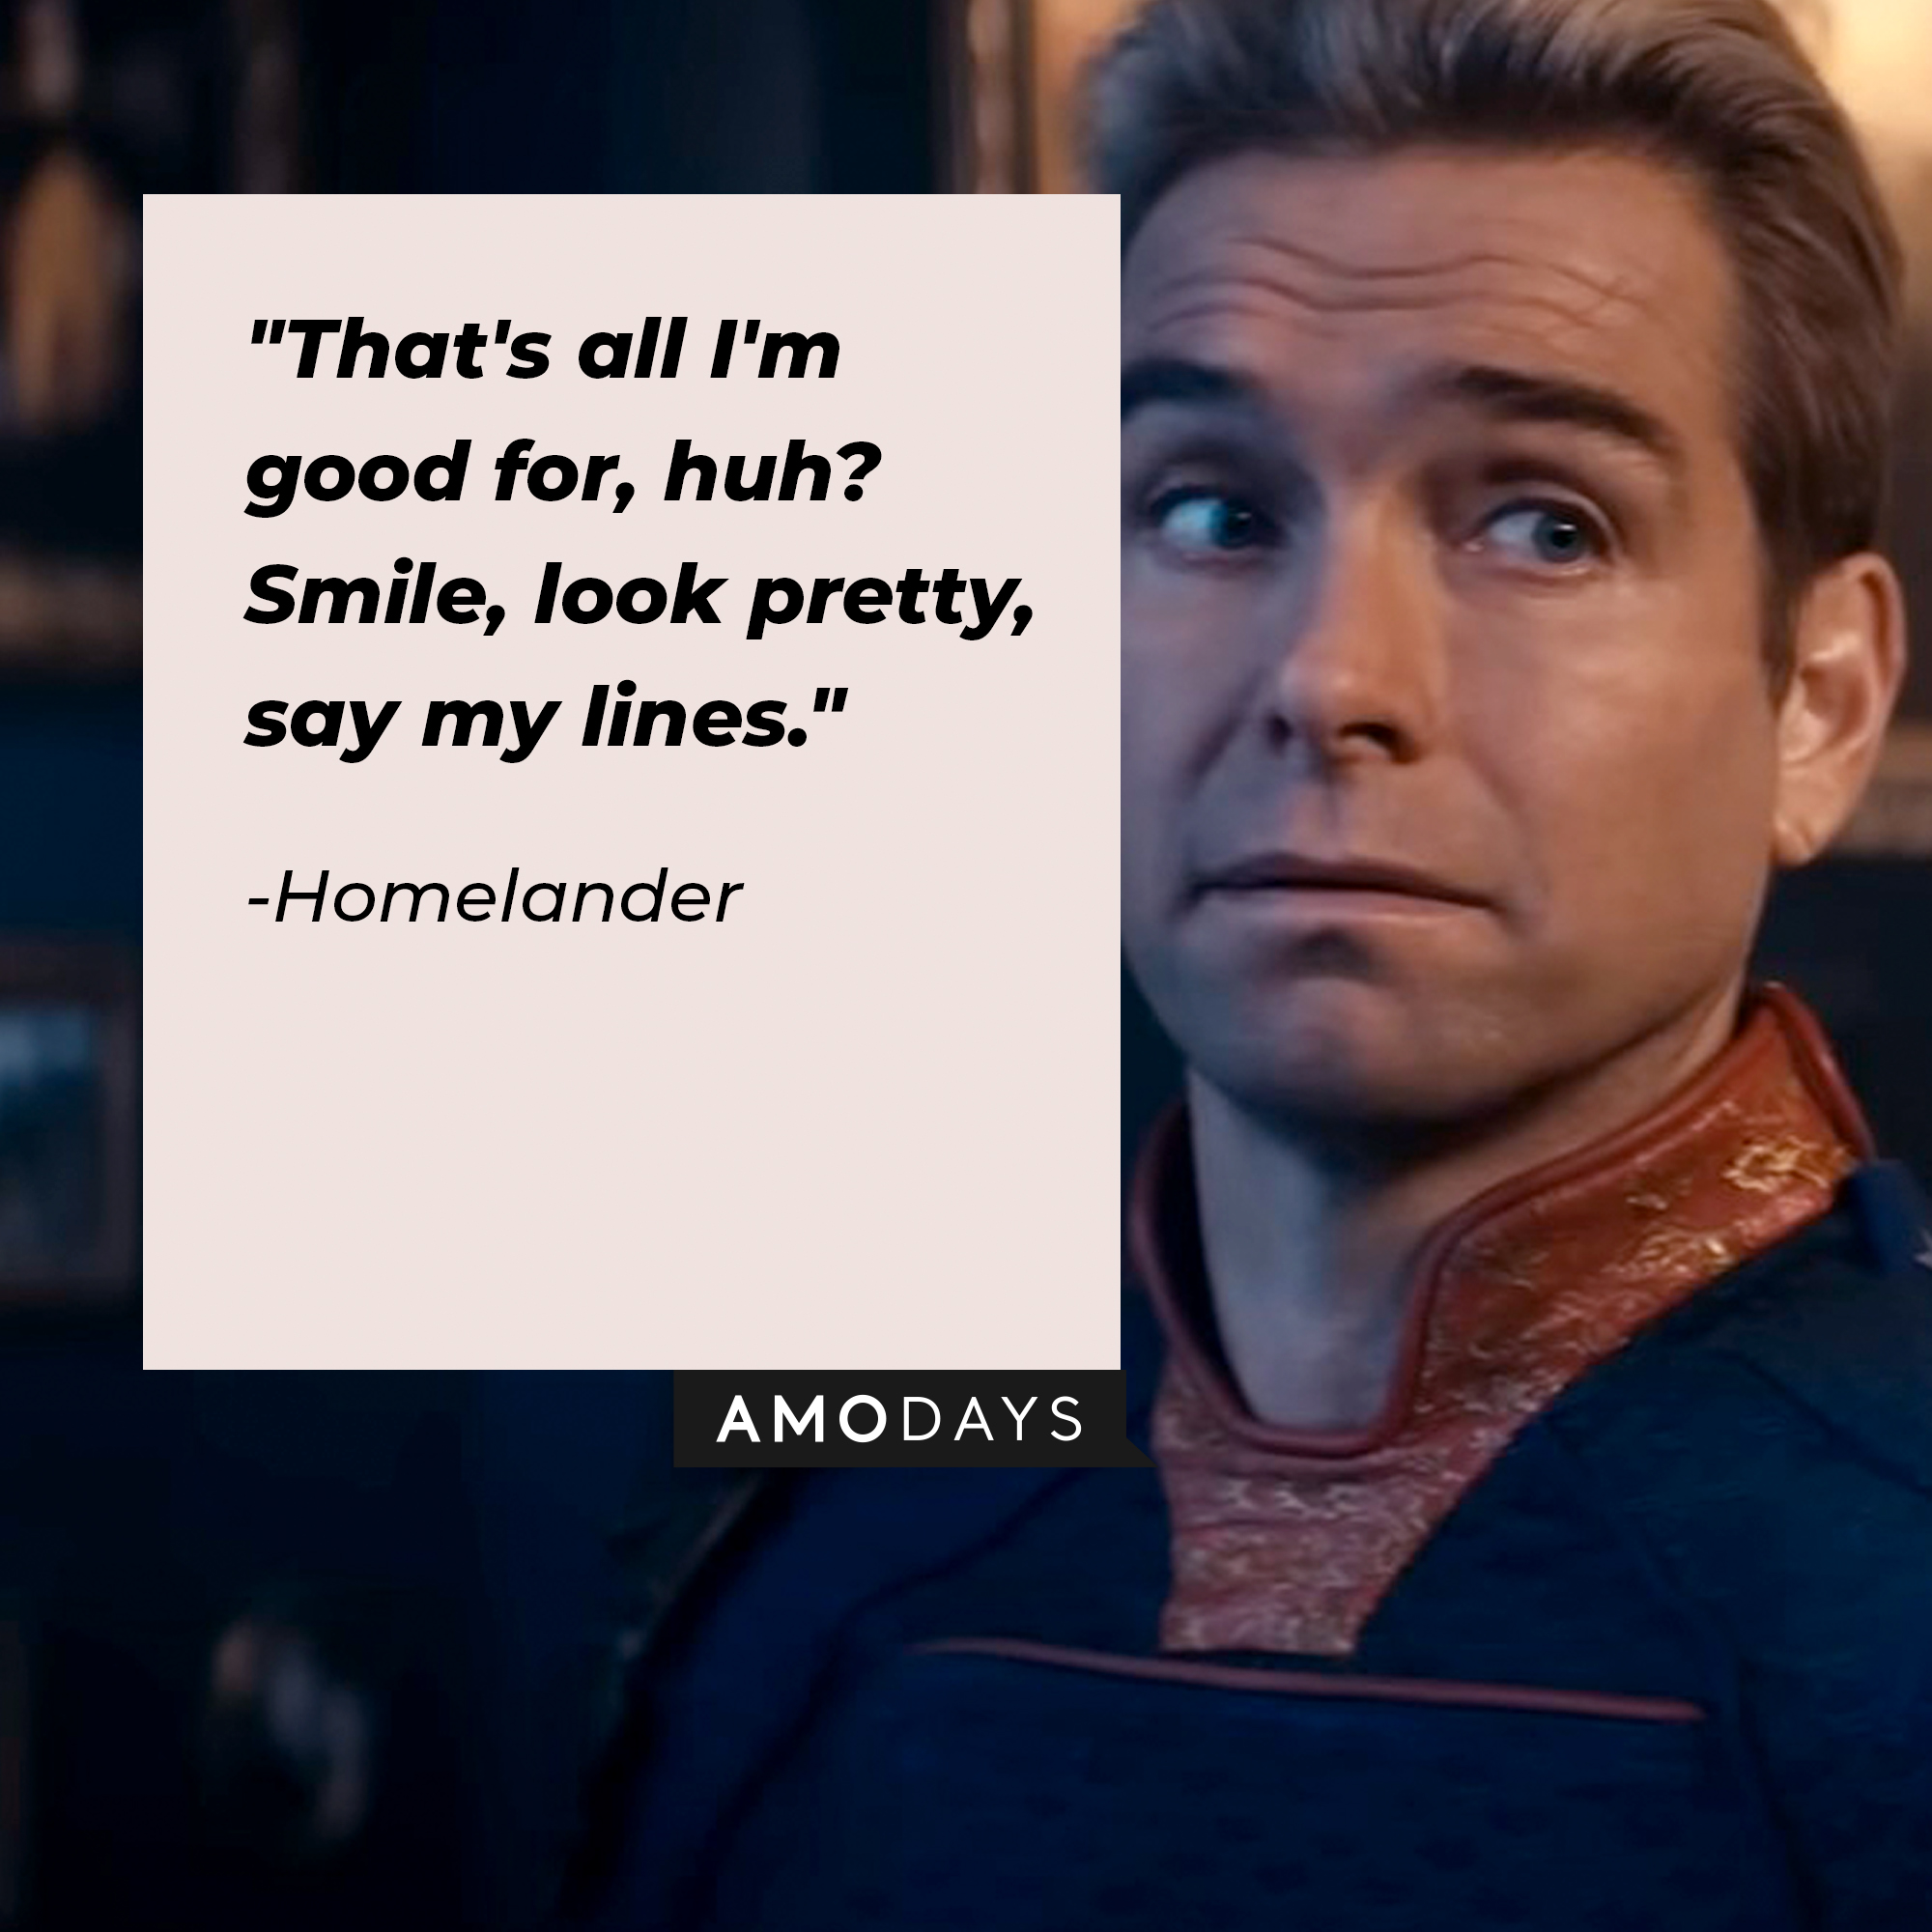 Homelander's quote: "That's all I'm good for, huh? Smile, look pretty, say my lines." | Source: Facebook.com/TheBoysTV